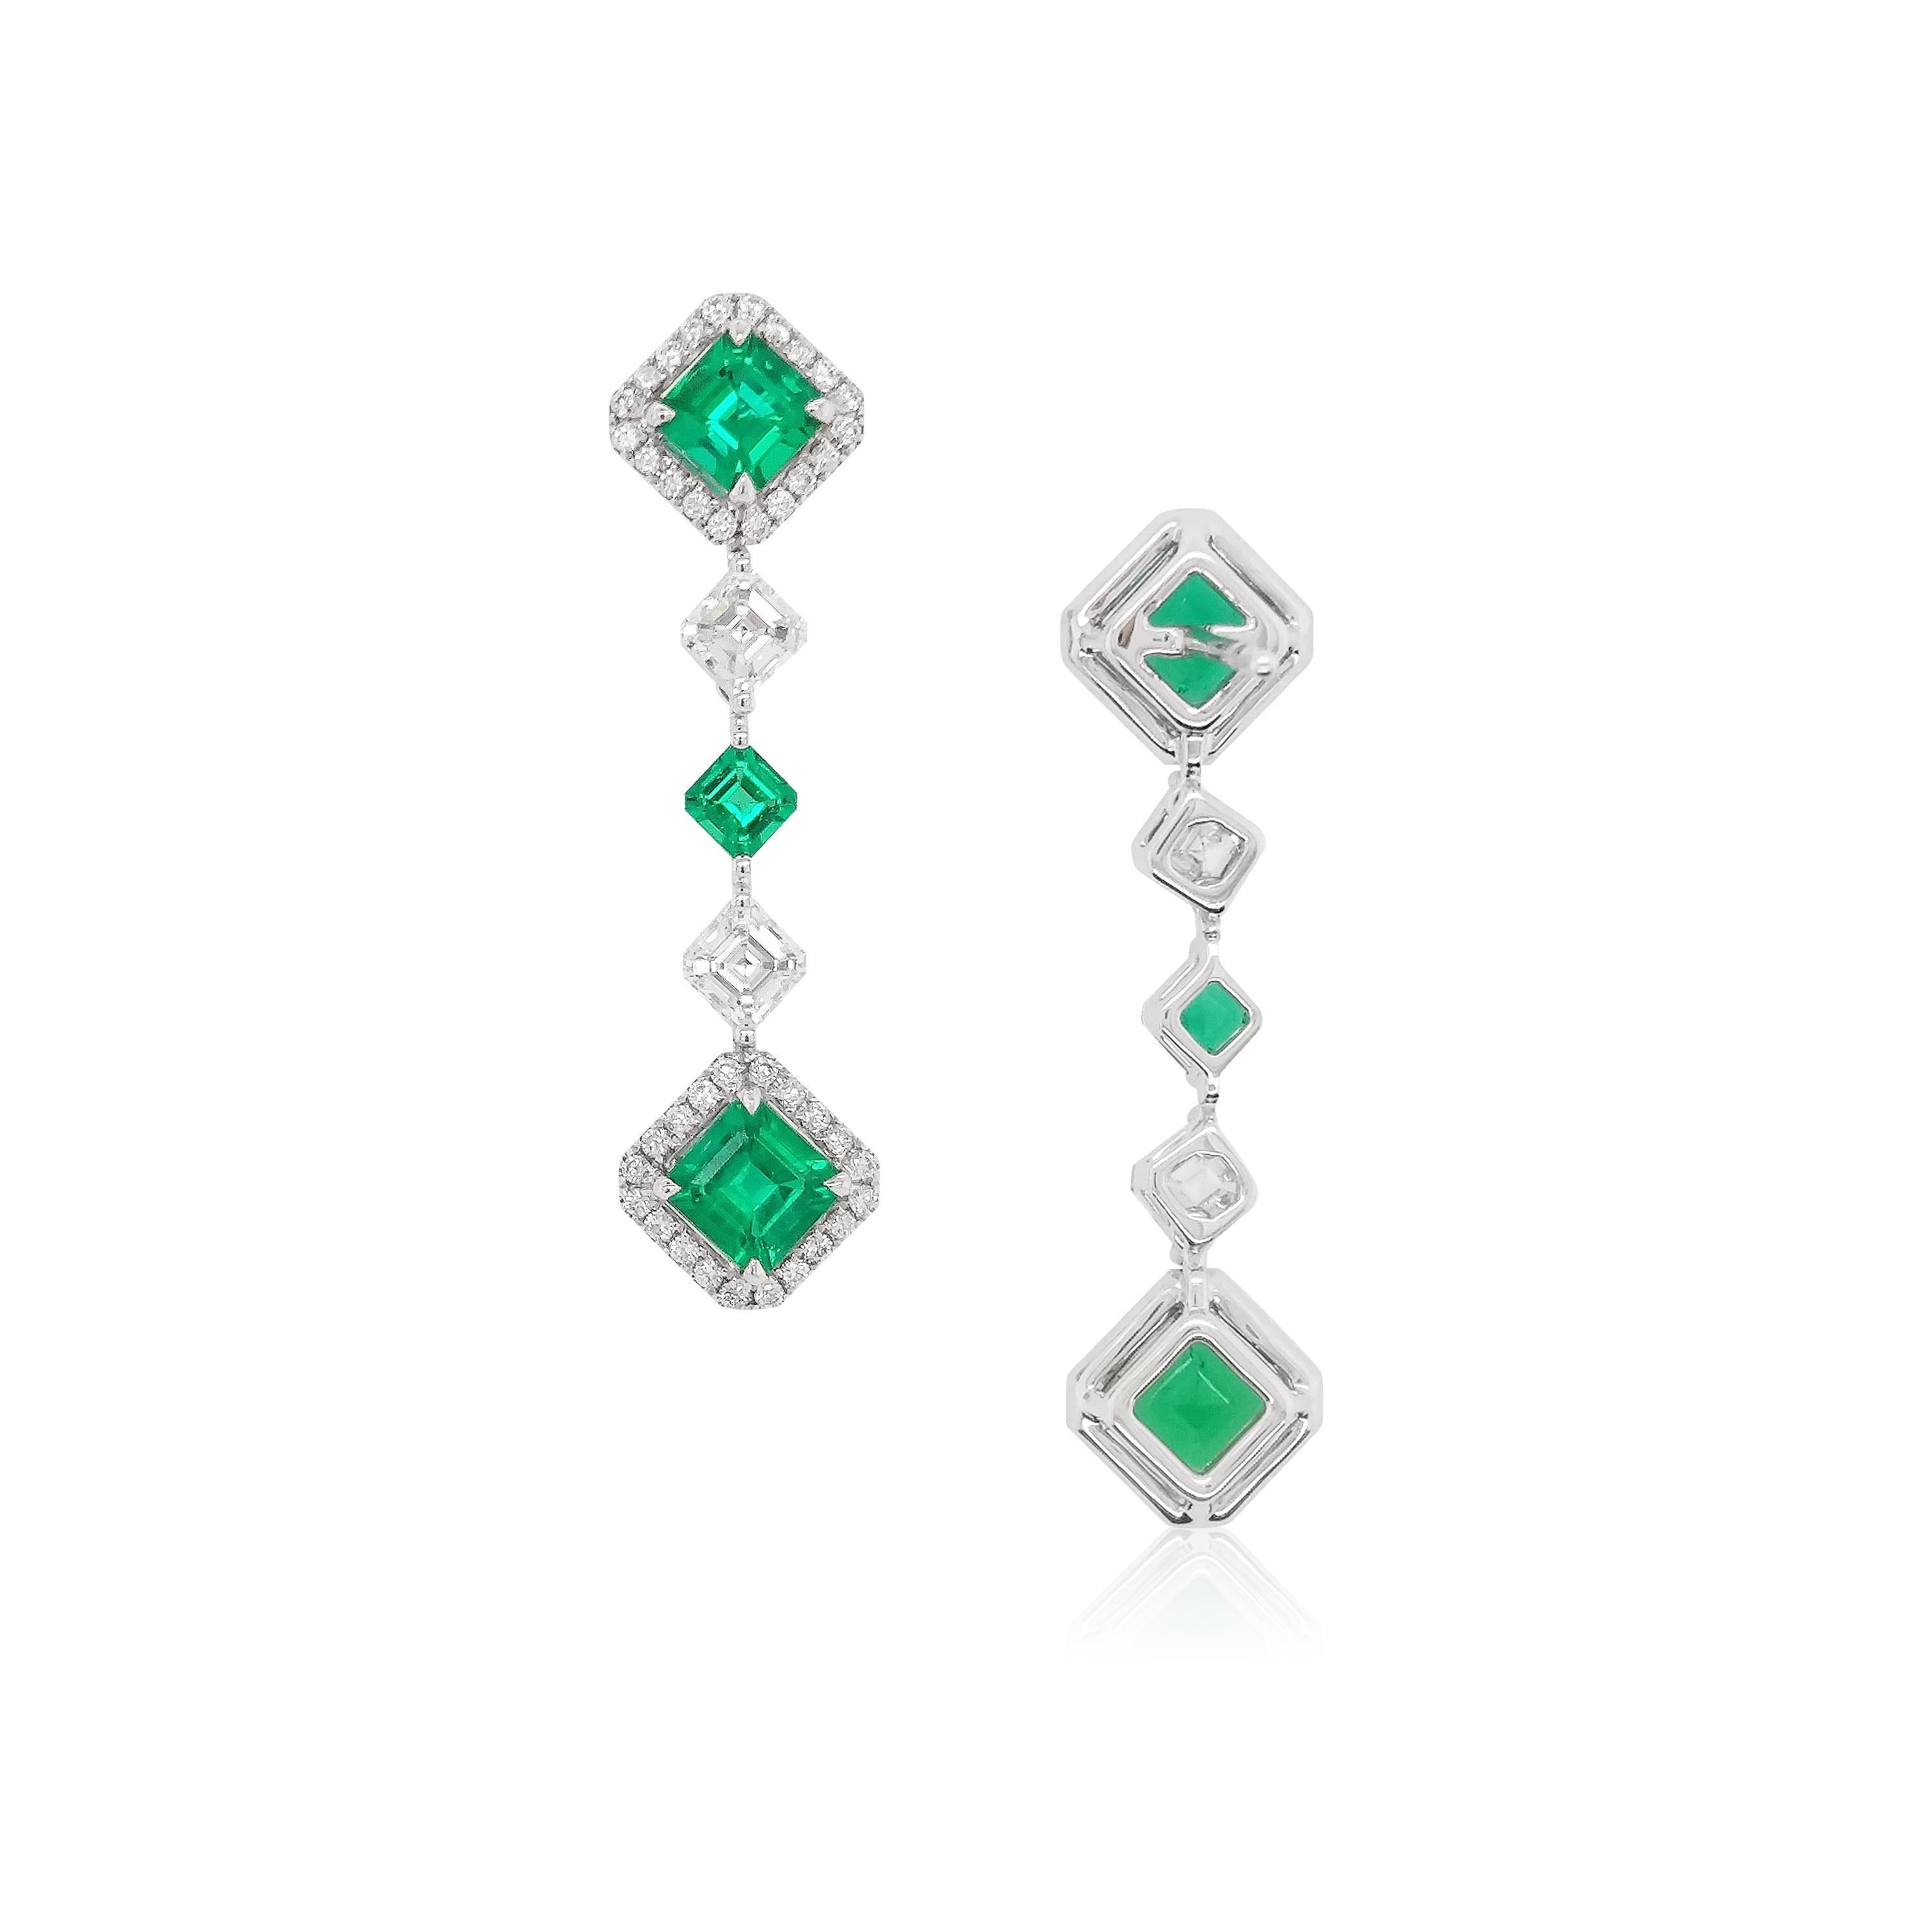 The timeless combination of Emerald and Diamond has been re-imagined in these glamorous earrings. Framed by scintillating White Diamonds, the Emeralds in this piece emits a rich hue that is sure to turn heads when combined with even the simplest of